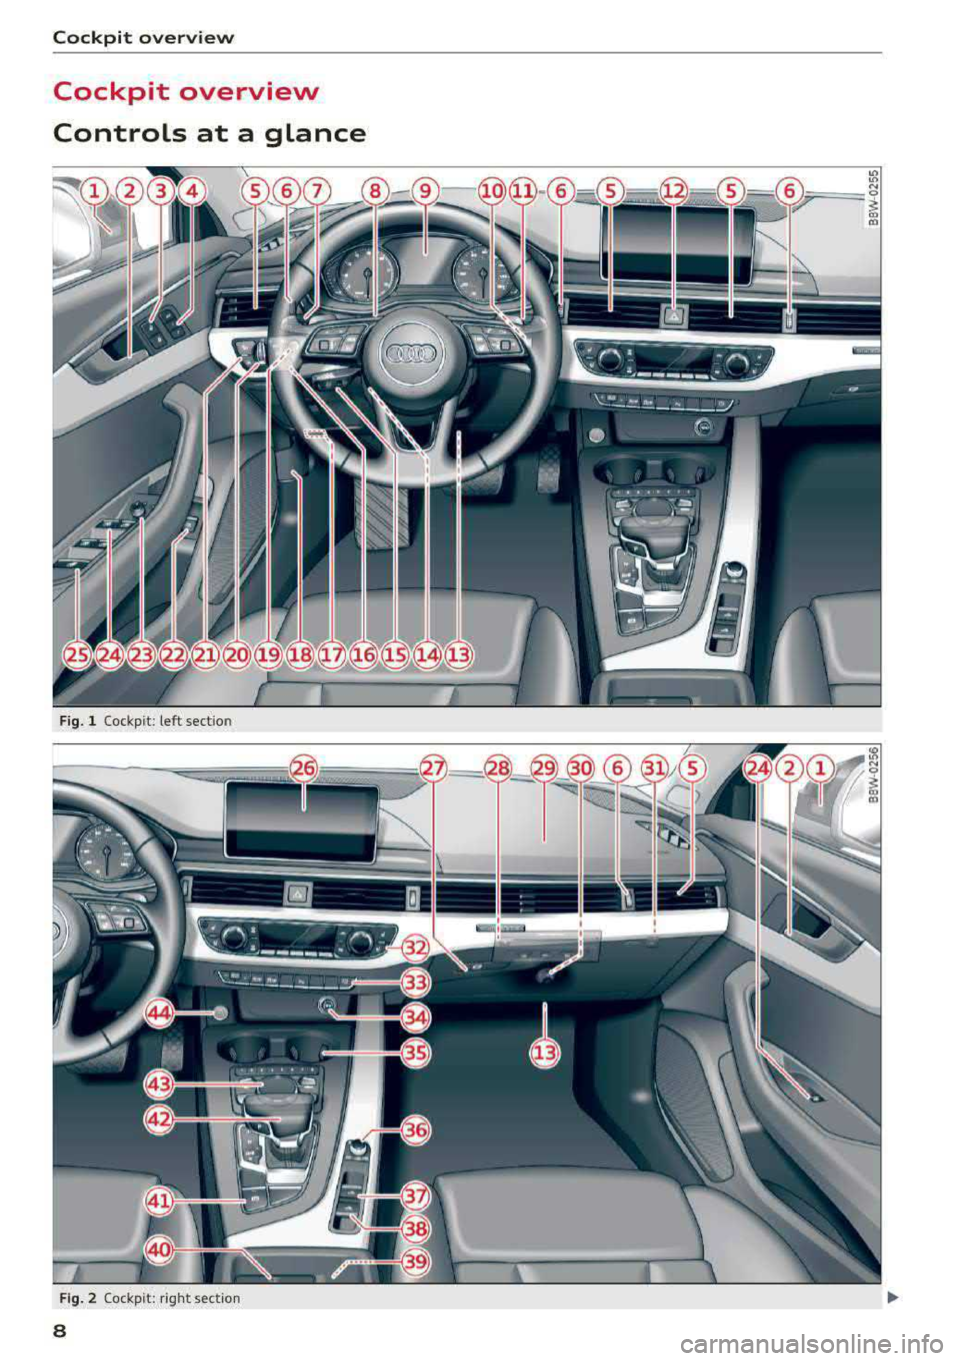 AUDI A5 COUPE 2018  Owners Manual Cockpit  overview 
Cockpit  overview  
Controls  at  a  glance 
F ig.  1  Cockpit : left  section 
F ig.  2  Cockpit:  rig ht sect ion 
8  